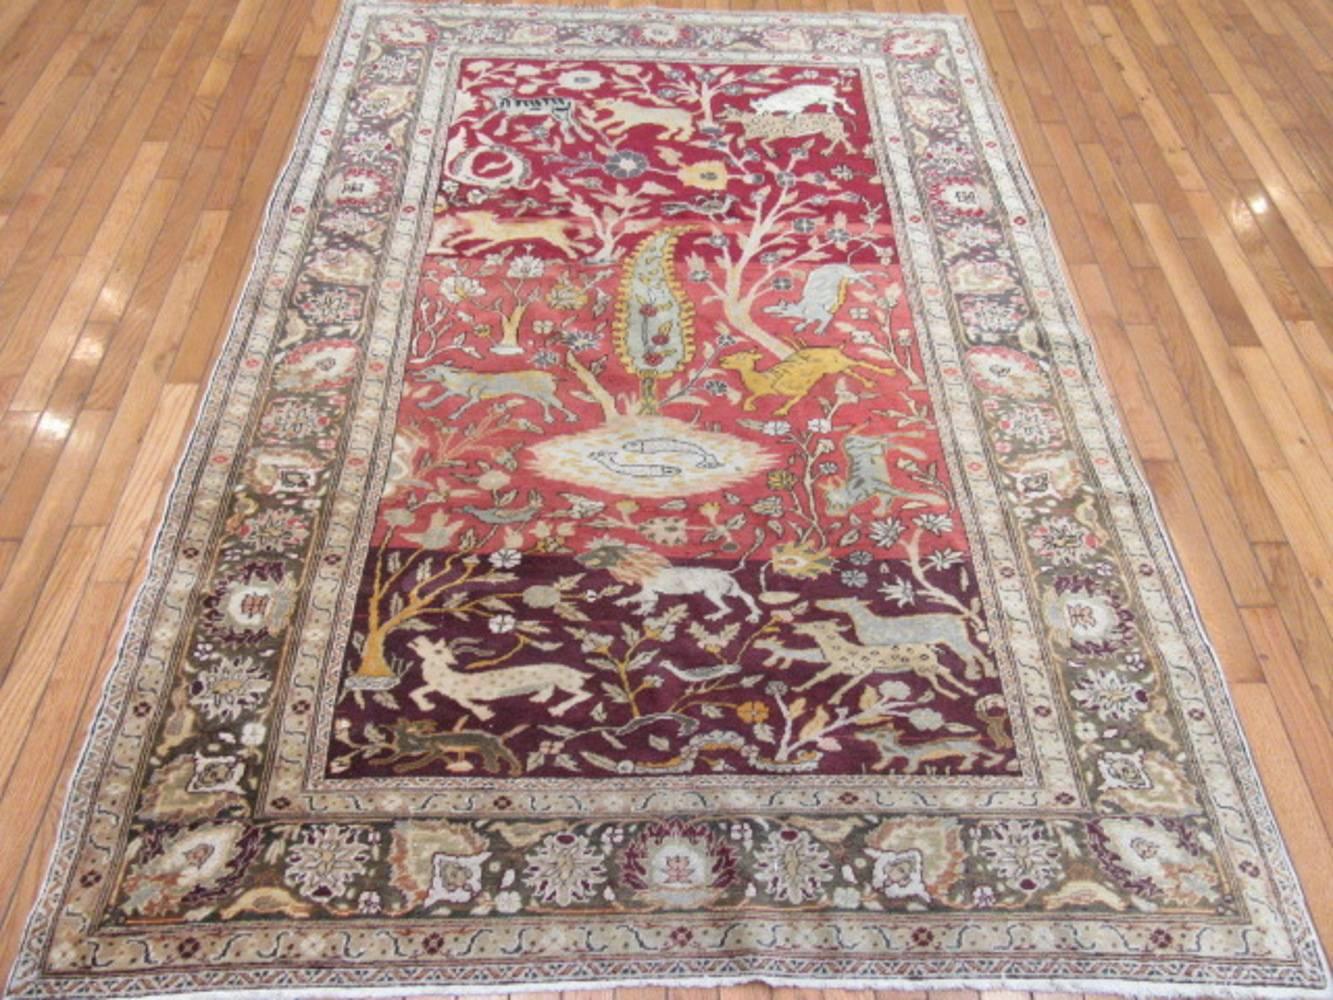 This is a small semi-antique hand-knotted Sivas rug from Turkey with a nature scene design. It is made with wool colored with natural dyes on a cotton foundation. It can be used anywhere even as a tapestry on the wall. The rug measures 4' 9'' x 6'